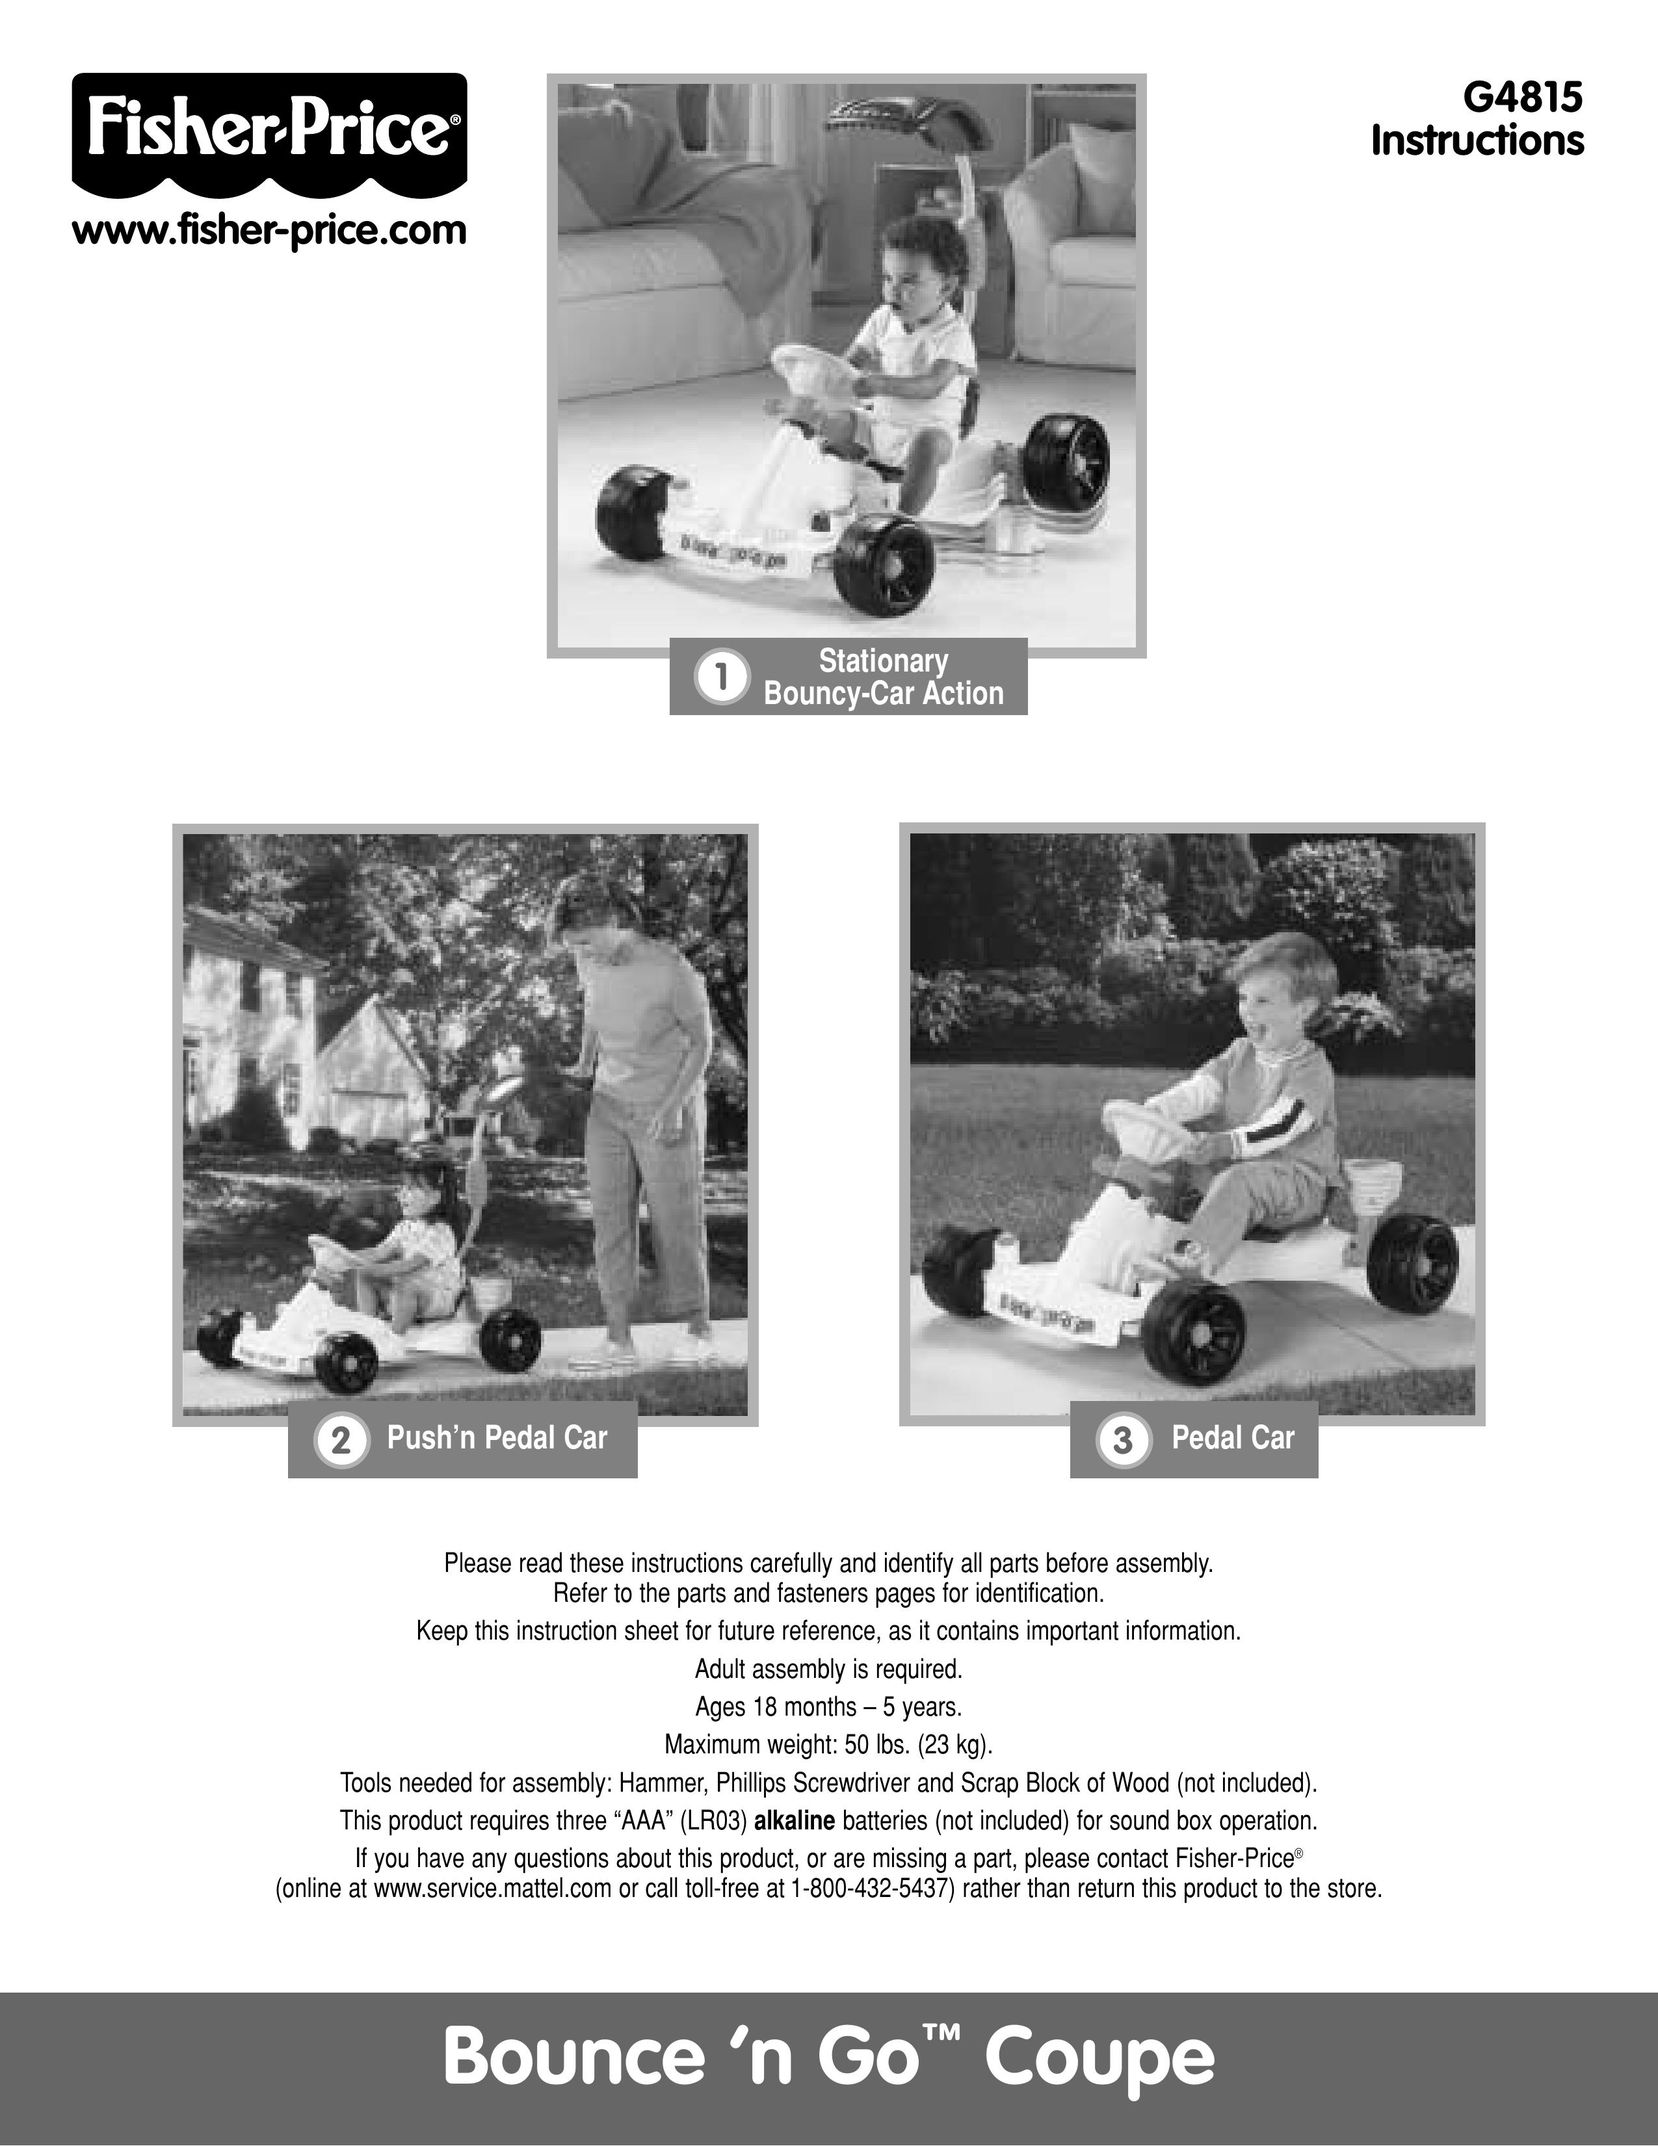 Fisher-Price G4815 Riding Toy User Manual